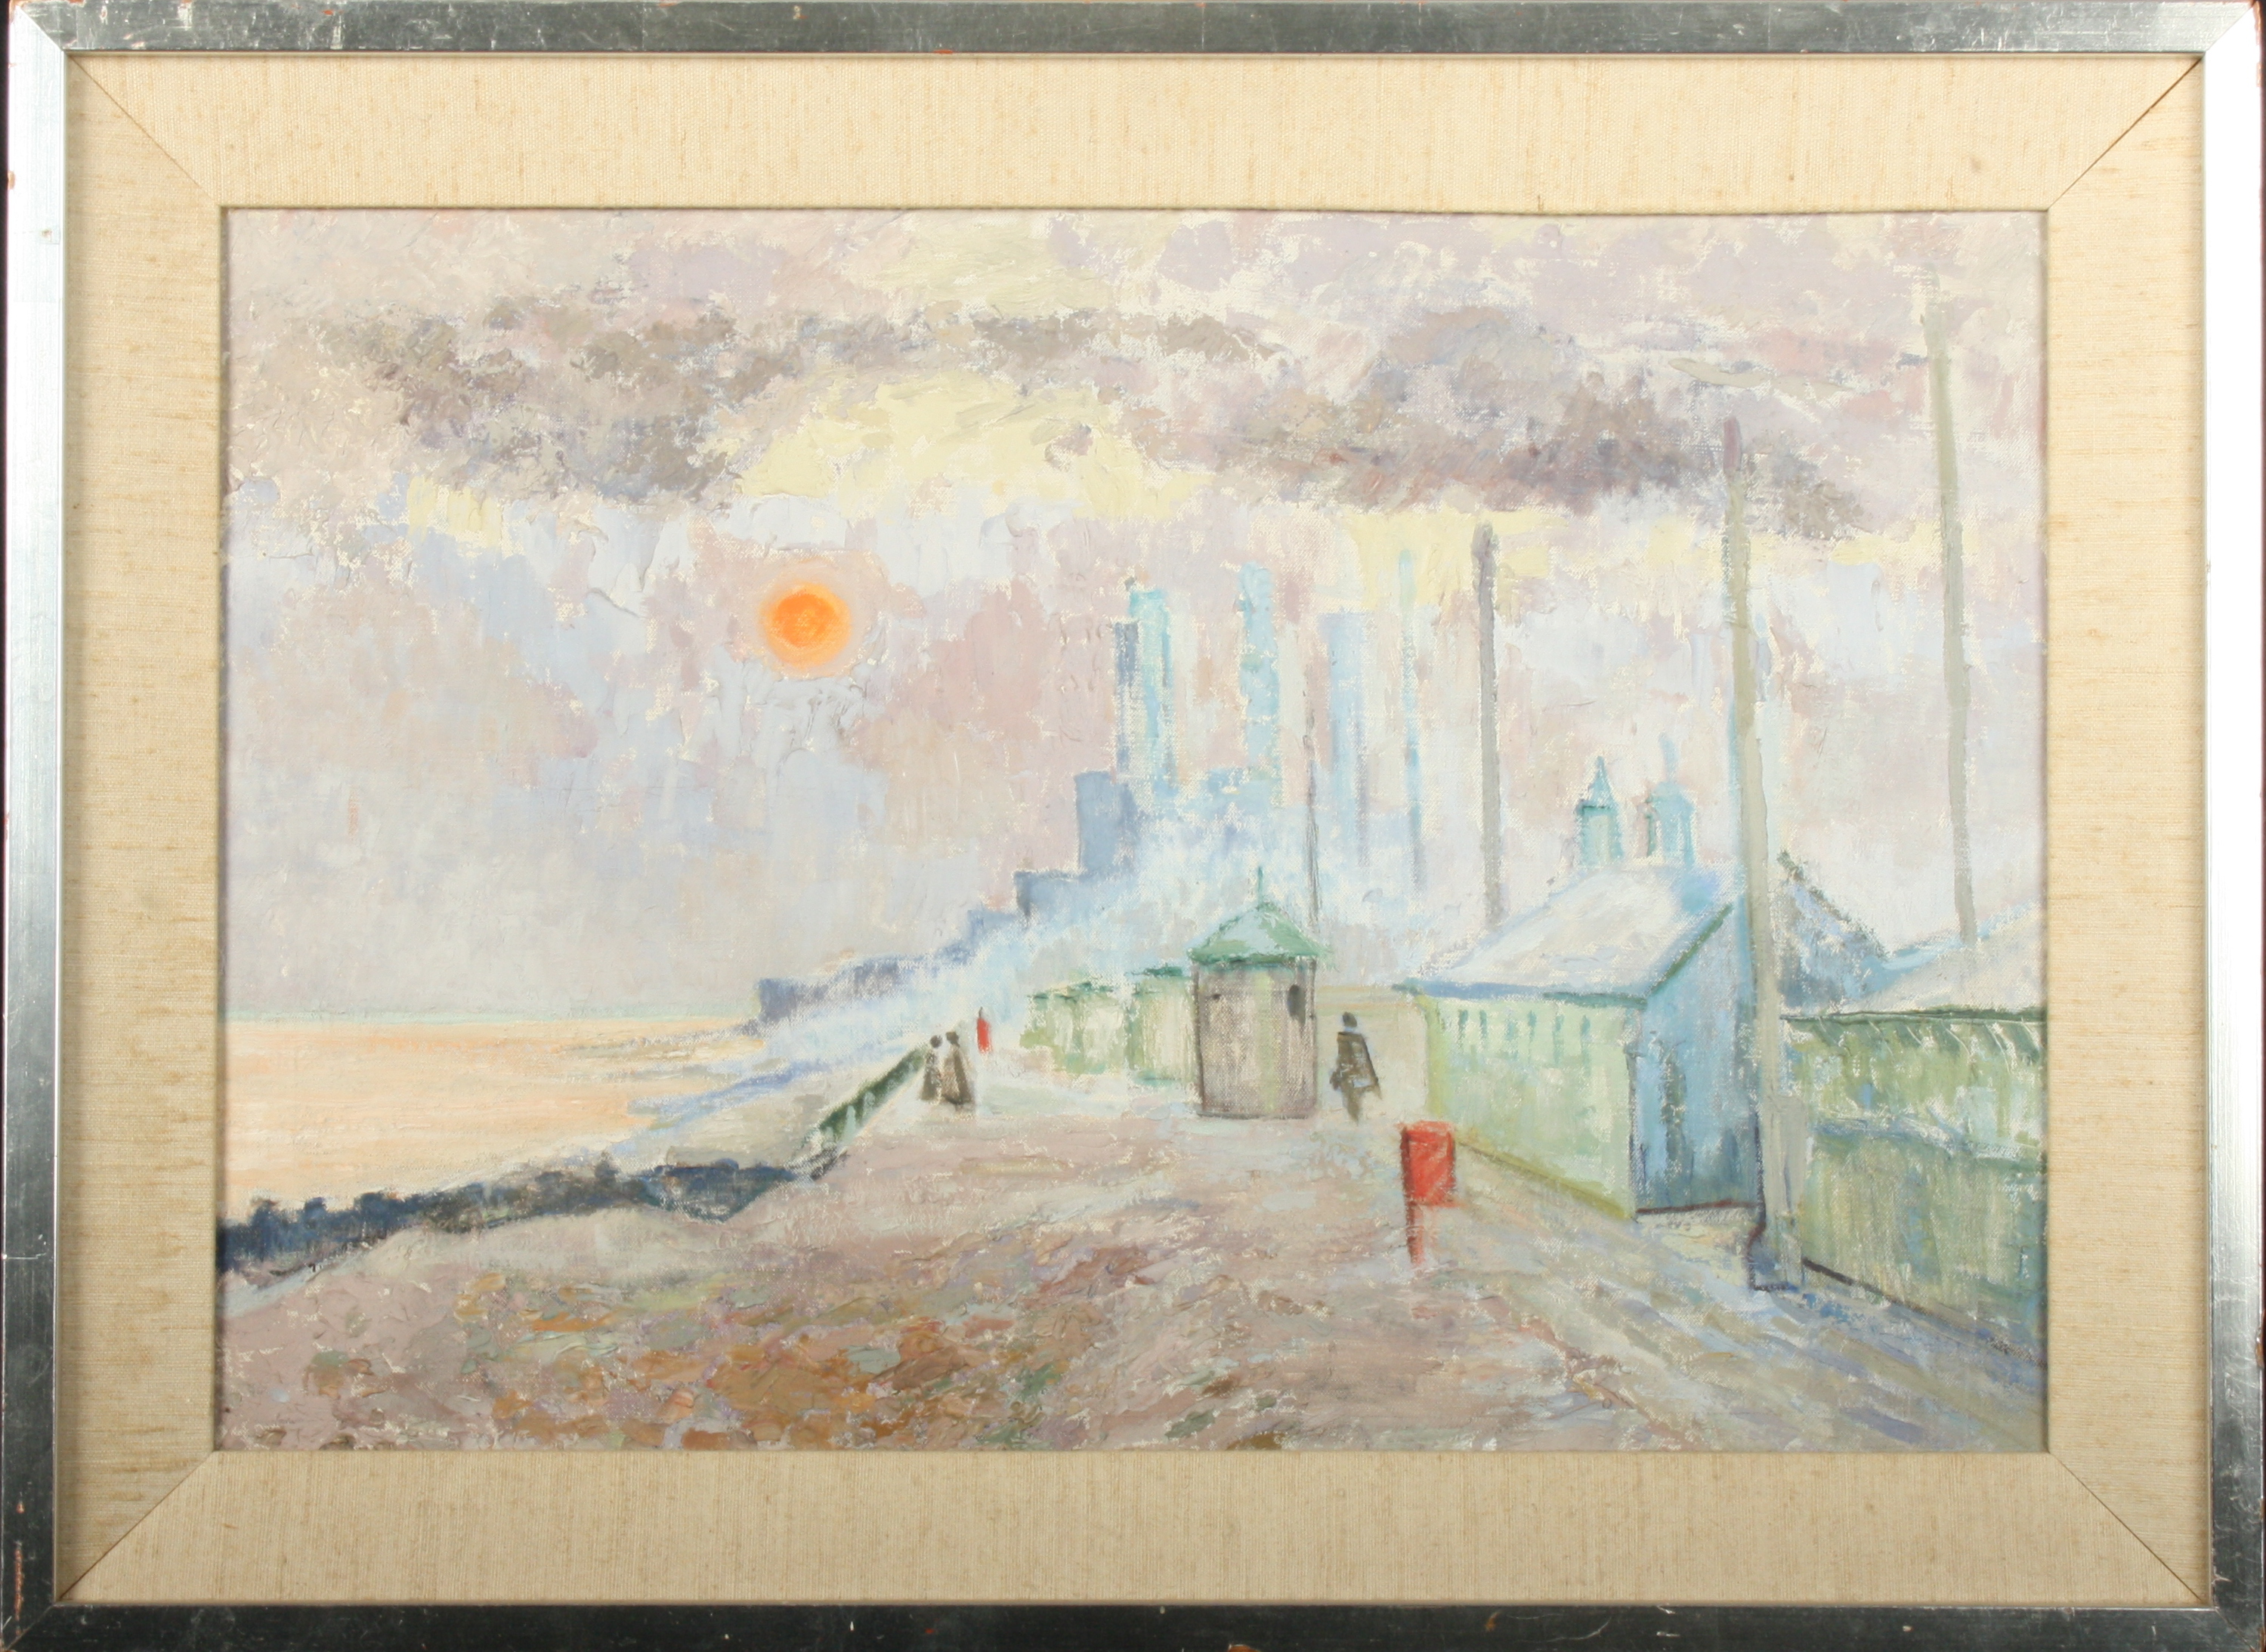 Barbara MORRISON Sunset Over Hove Oil on canvas Signed and dated 1956 to the back 33 x 49cm - Image 2 of 3